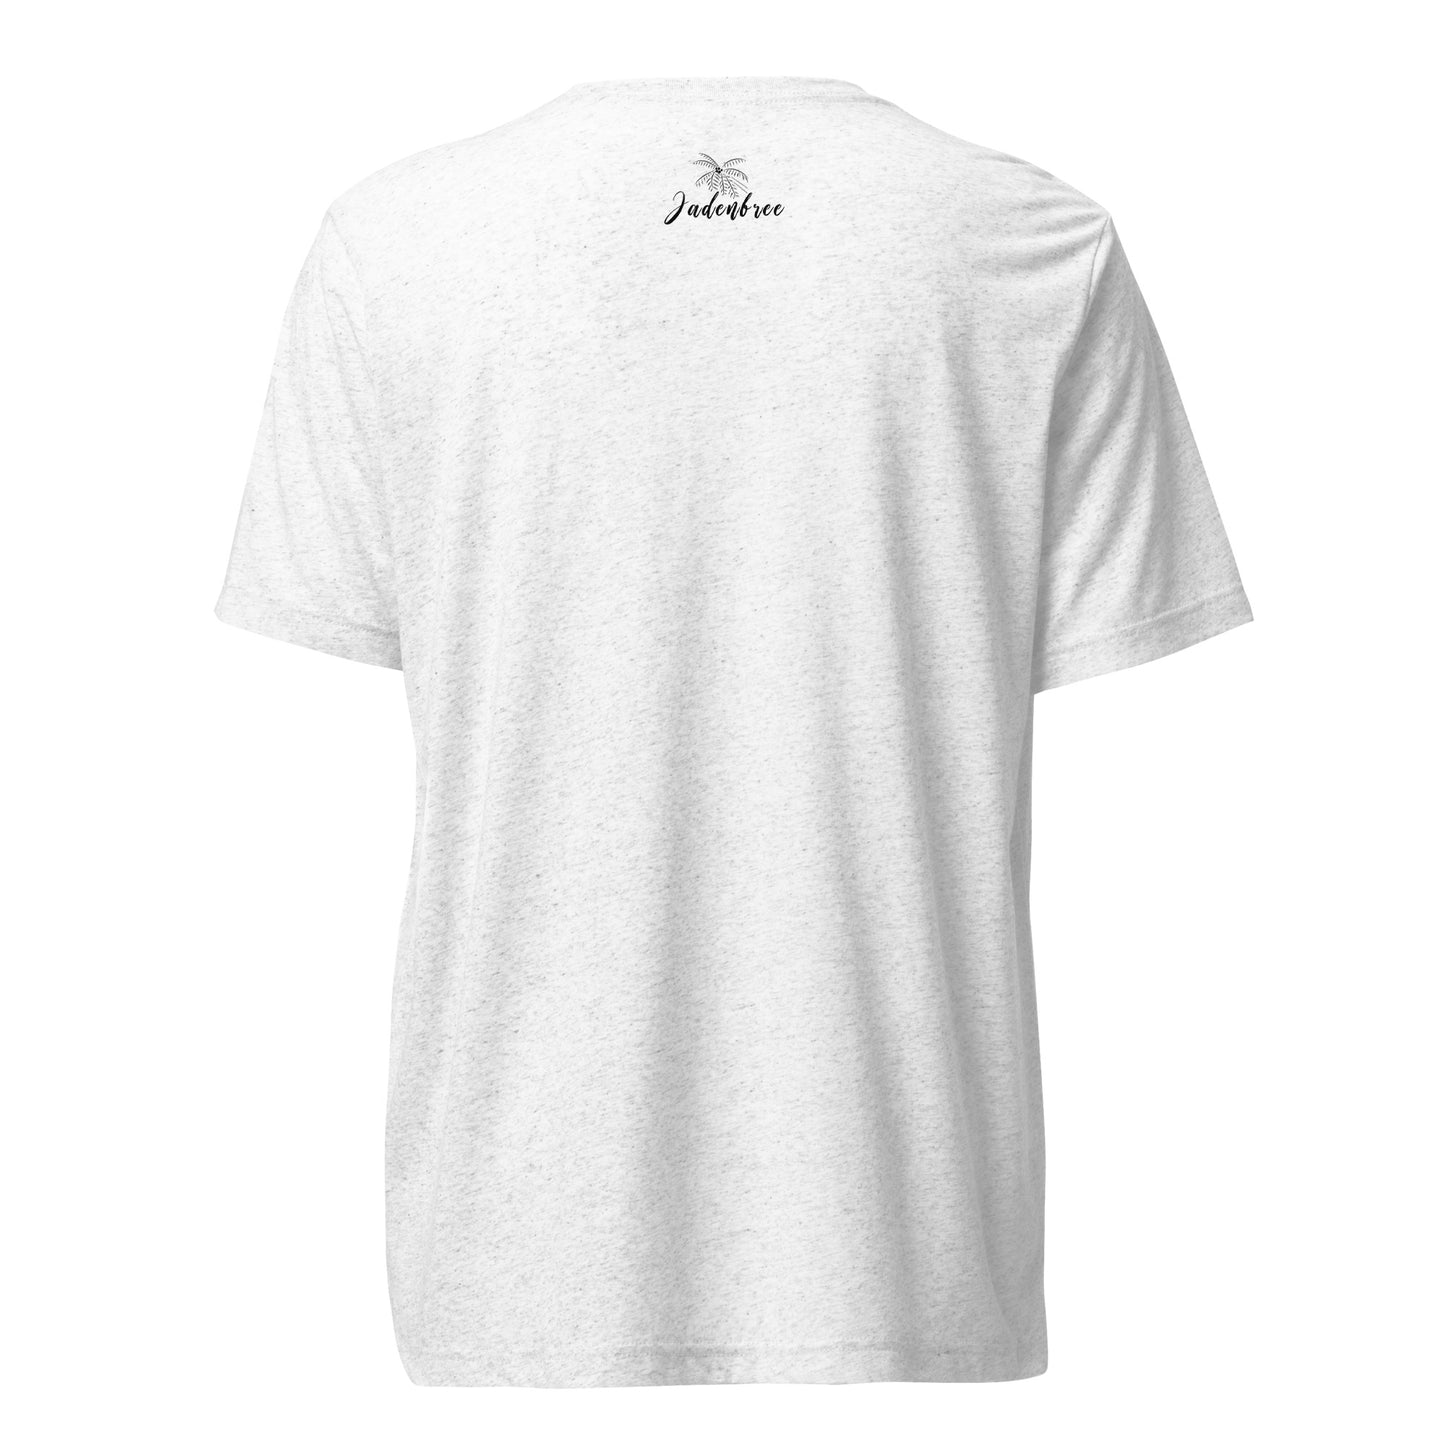 Moonlight Odyssey Embroidered Unisex T-Shirt